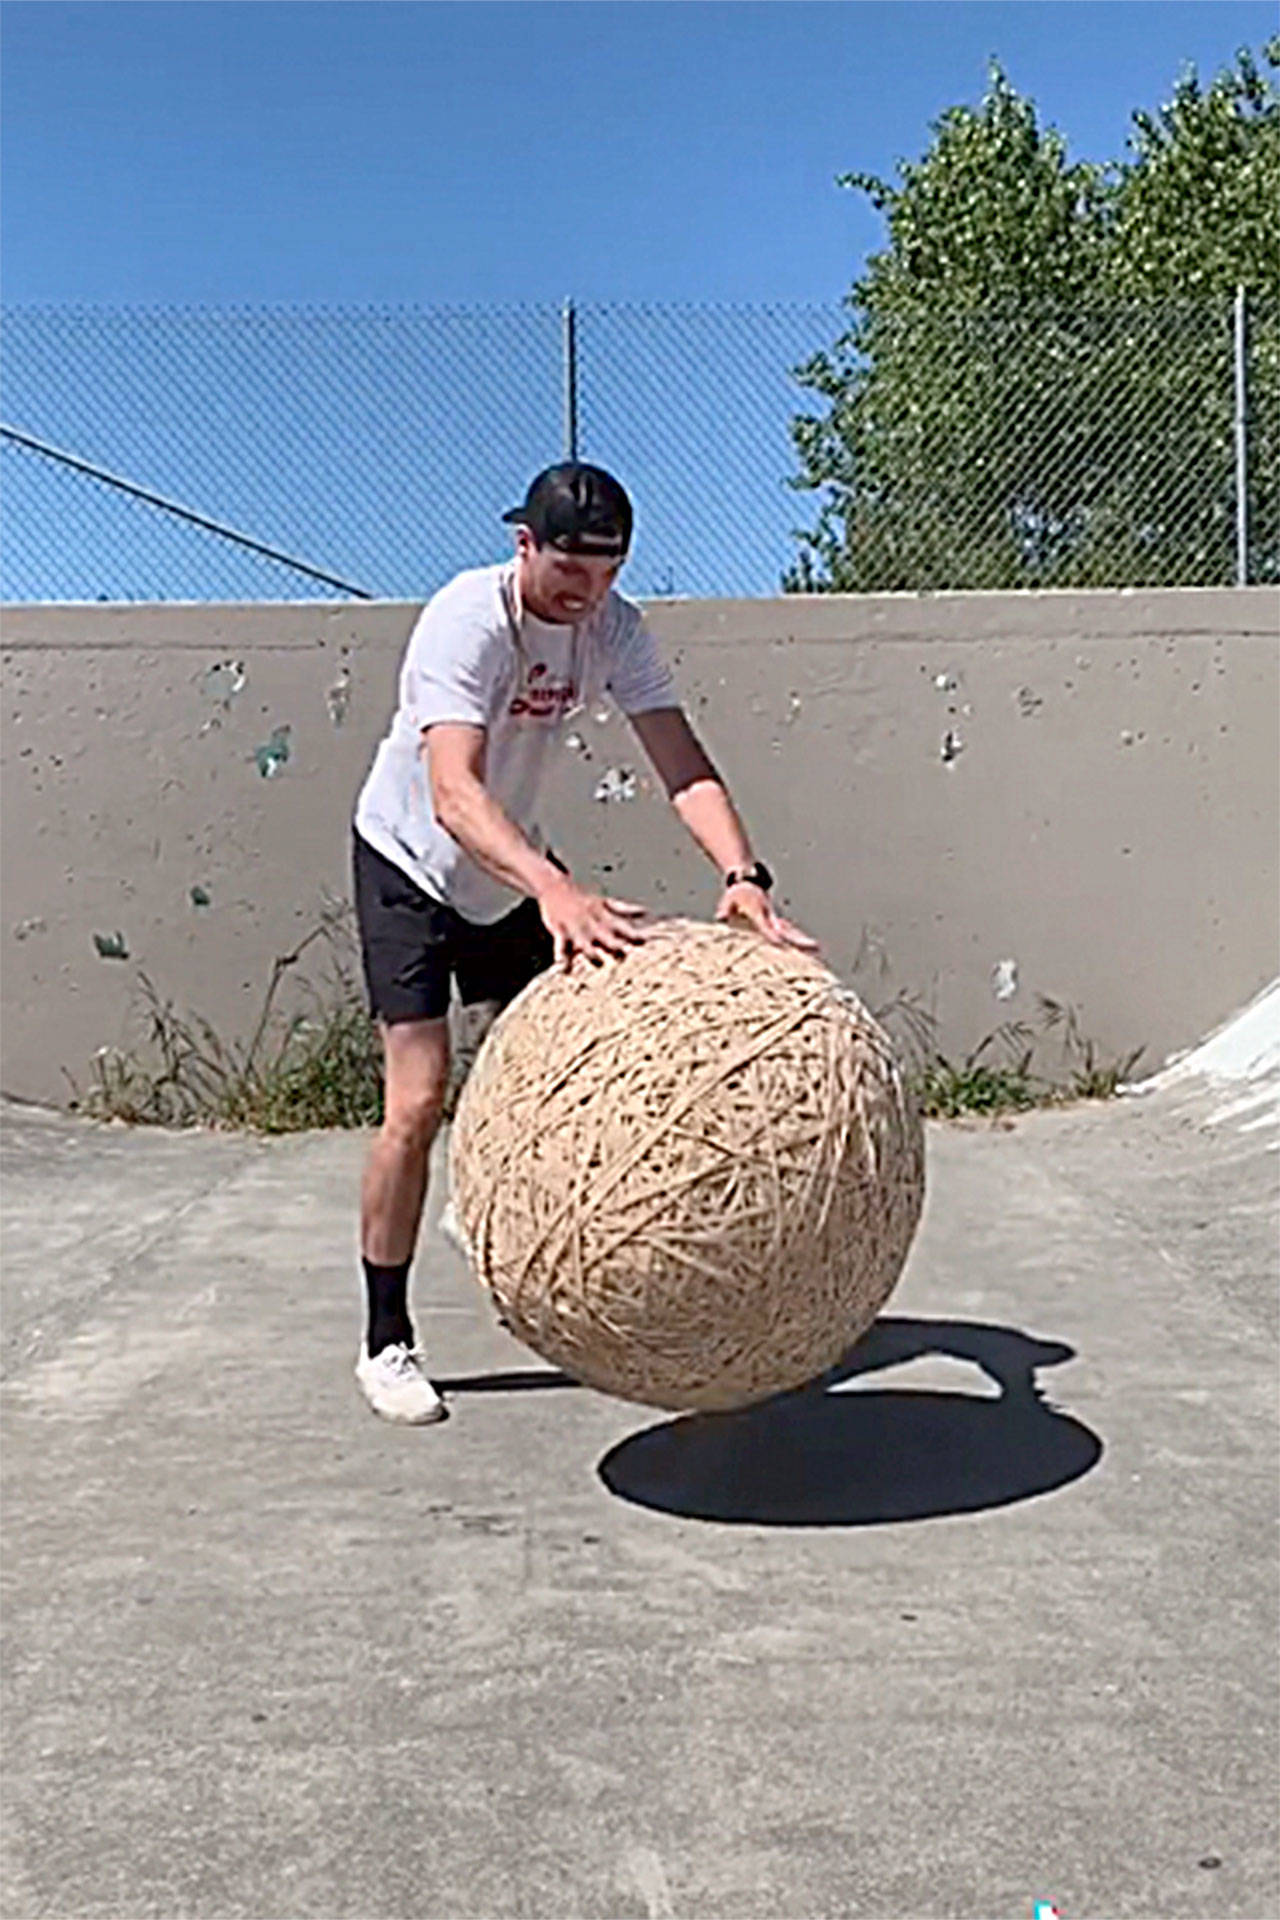 Jayson Brocklesby, aka Rubber Band Ball Guy, has taken his giant ball across the peninsula for video-ops, including at the Sequim Skate Park. His goal is to make a 500 pound ball. Photo courtesy of Jayson Brocklesby